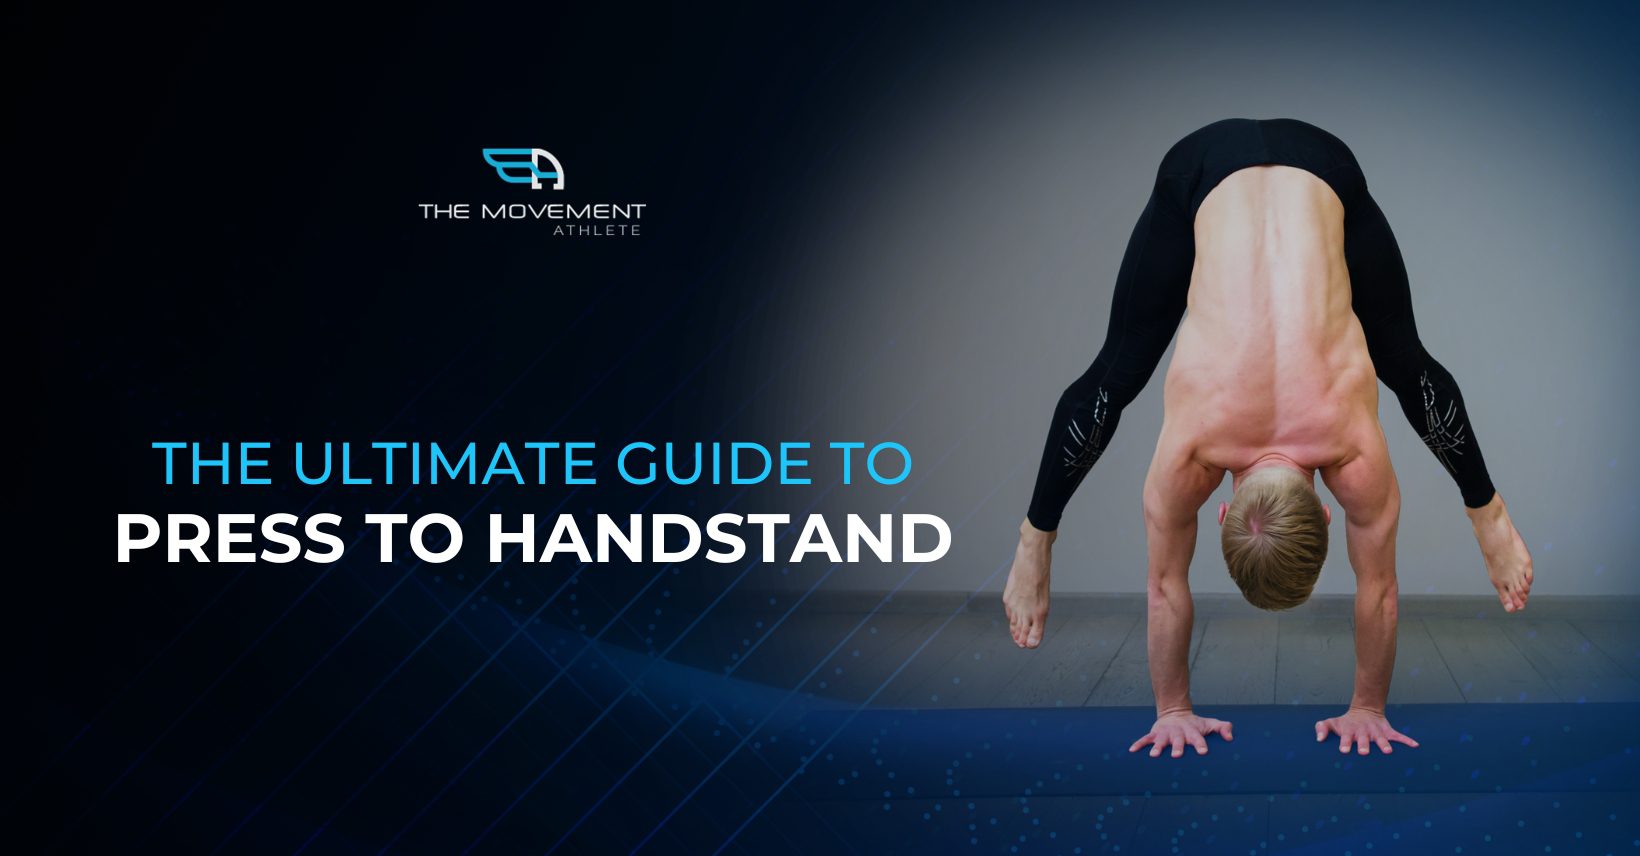 The Ultimate Guide to Press to Handstand